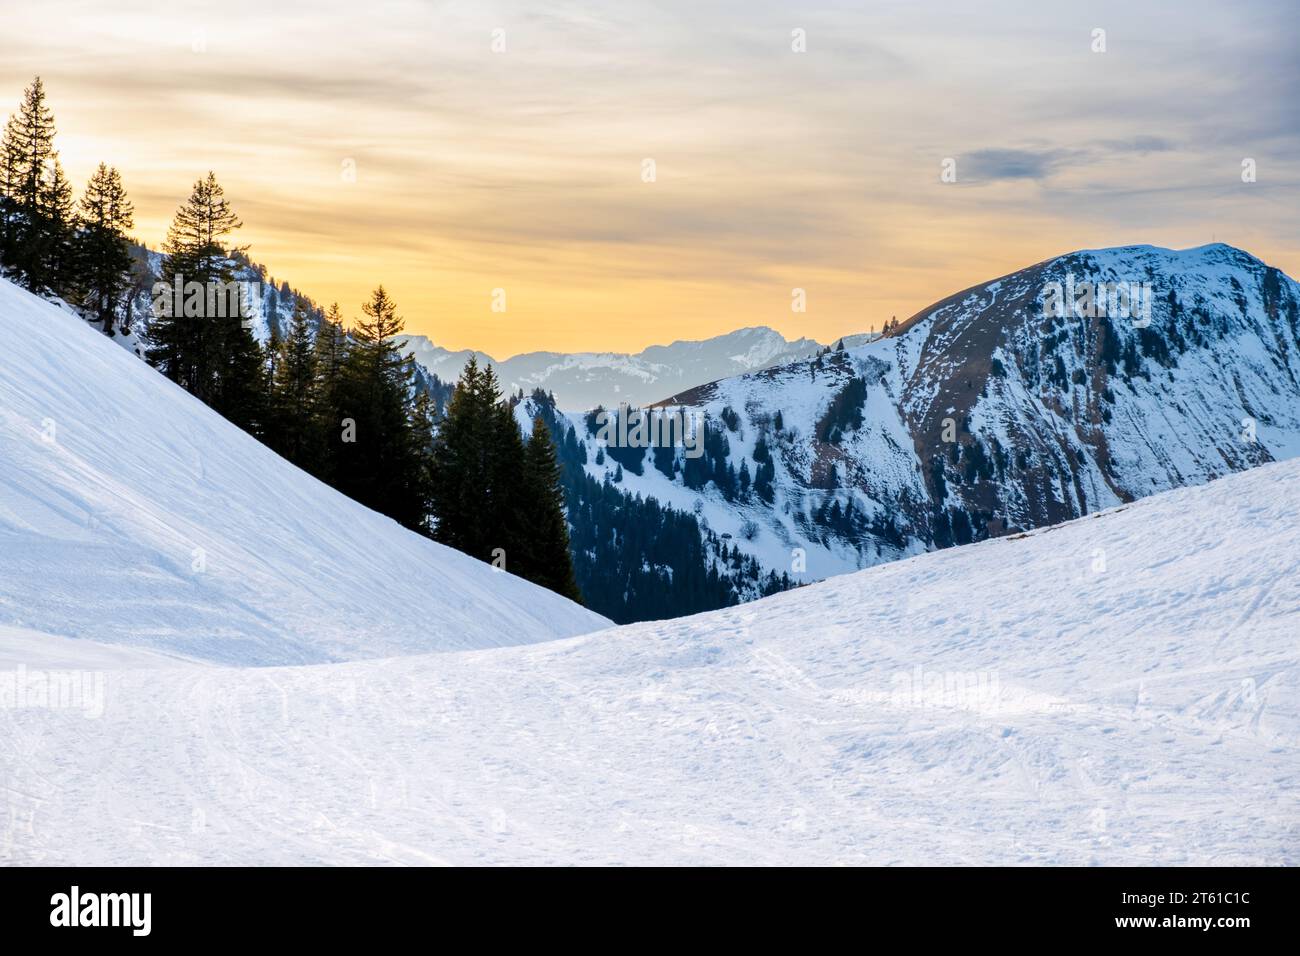 Winter landscape on Klewenalp mountain in Swiss Alps, Switzerland at sunset. Popular ski slope and winter sport attraction with snowy mountains and Stock Photo